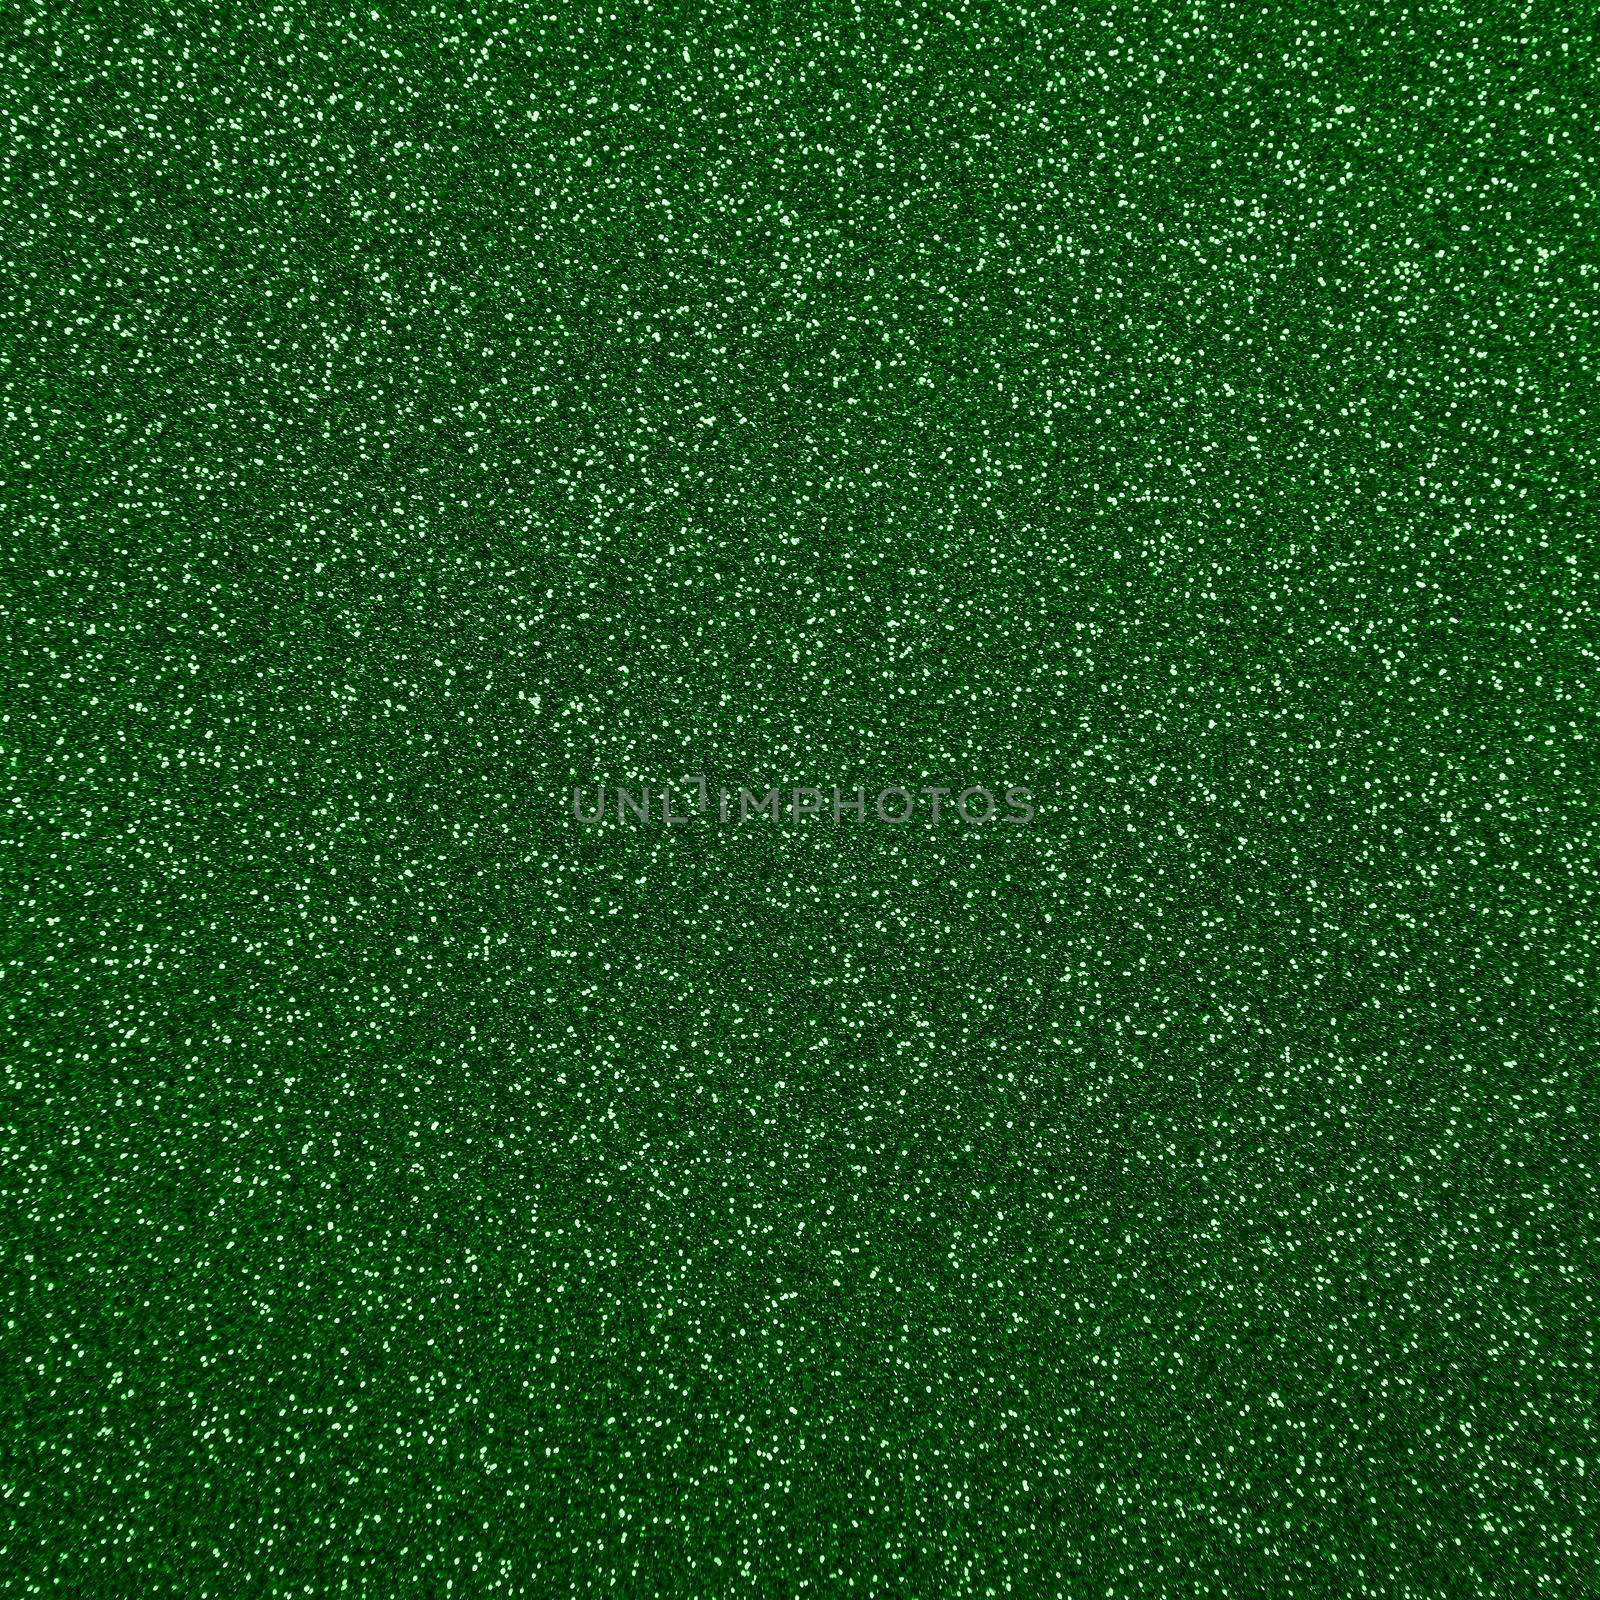 Abstract background texture of shiny colorful vivid dark green glitter noise pattern